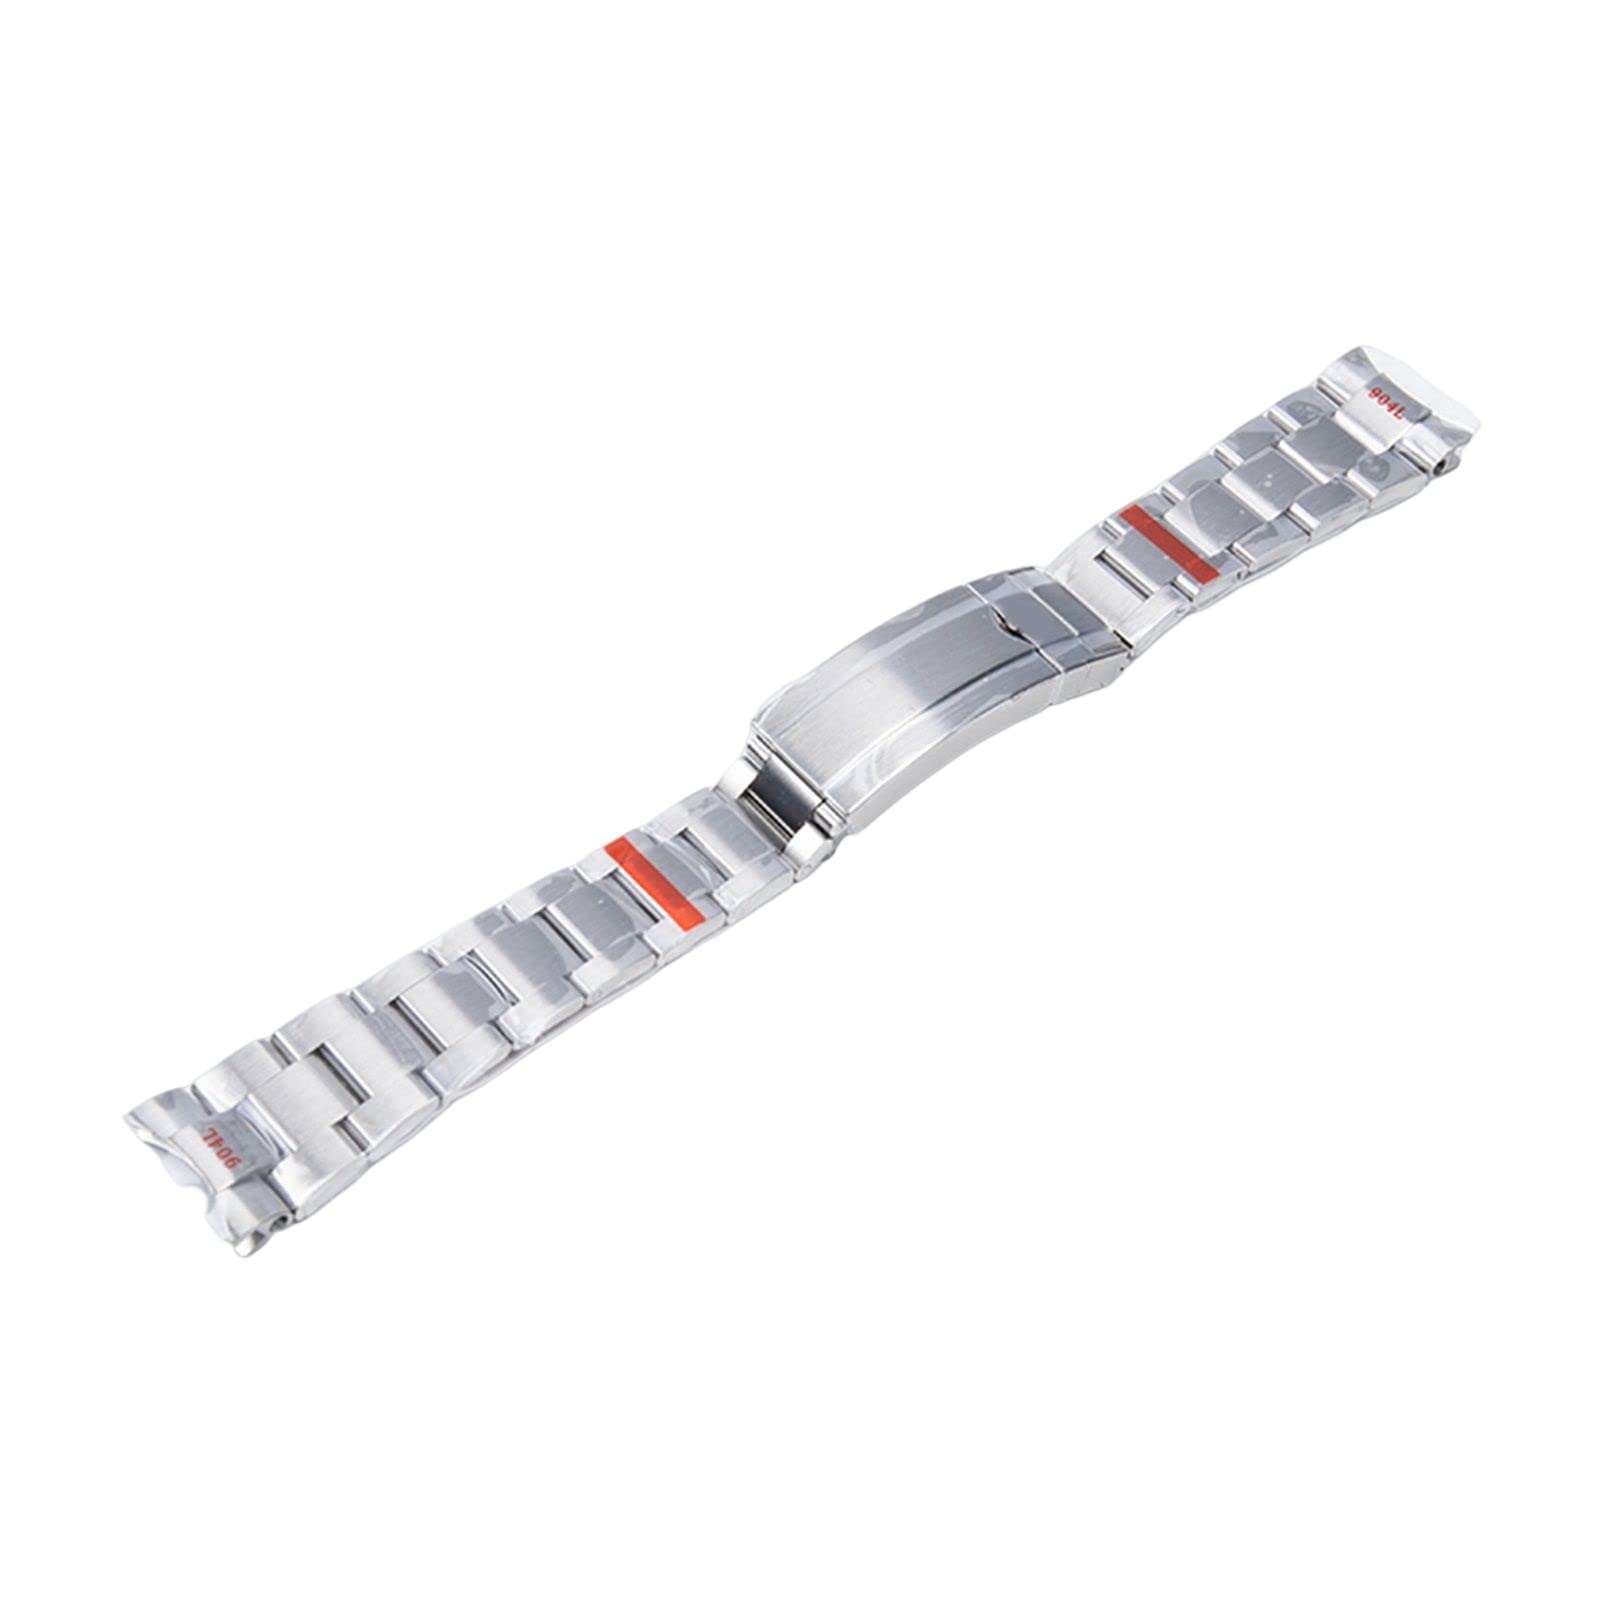 FULNES Brushed 904L Stainless Steel 20mm Watch Band Replace For Rolex Strap For Submariner SUB GMT Glide Folding Buckle